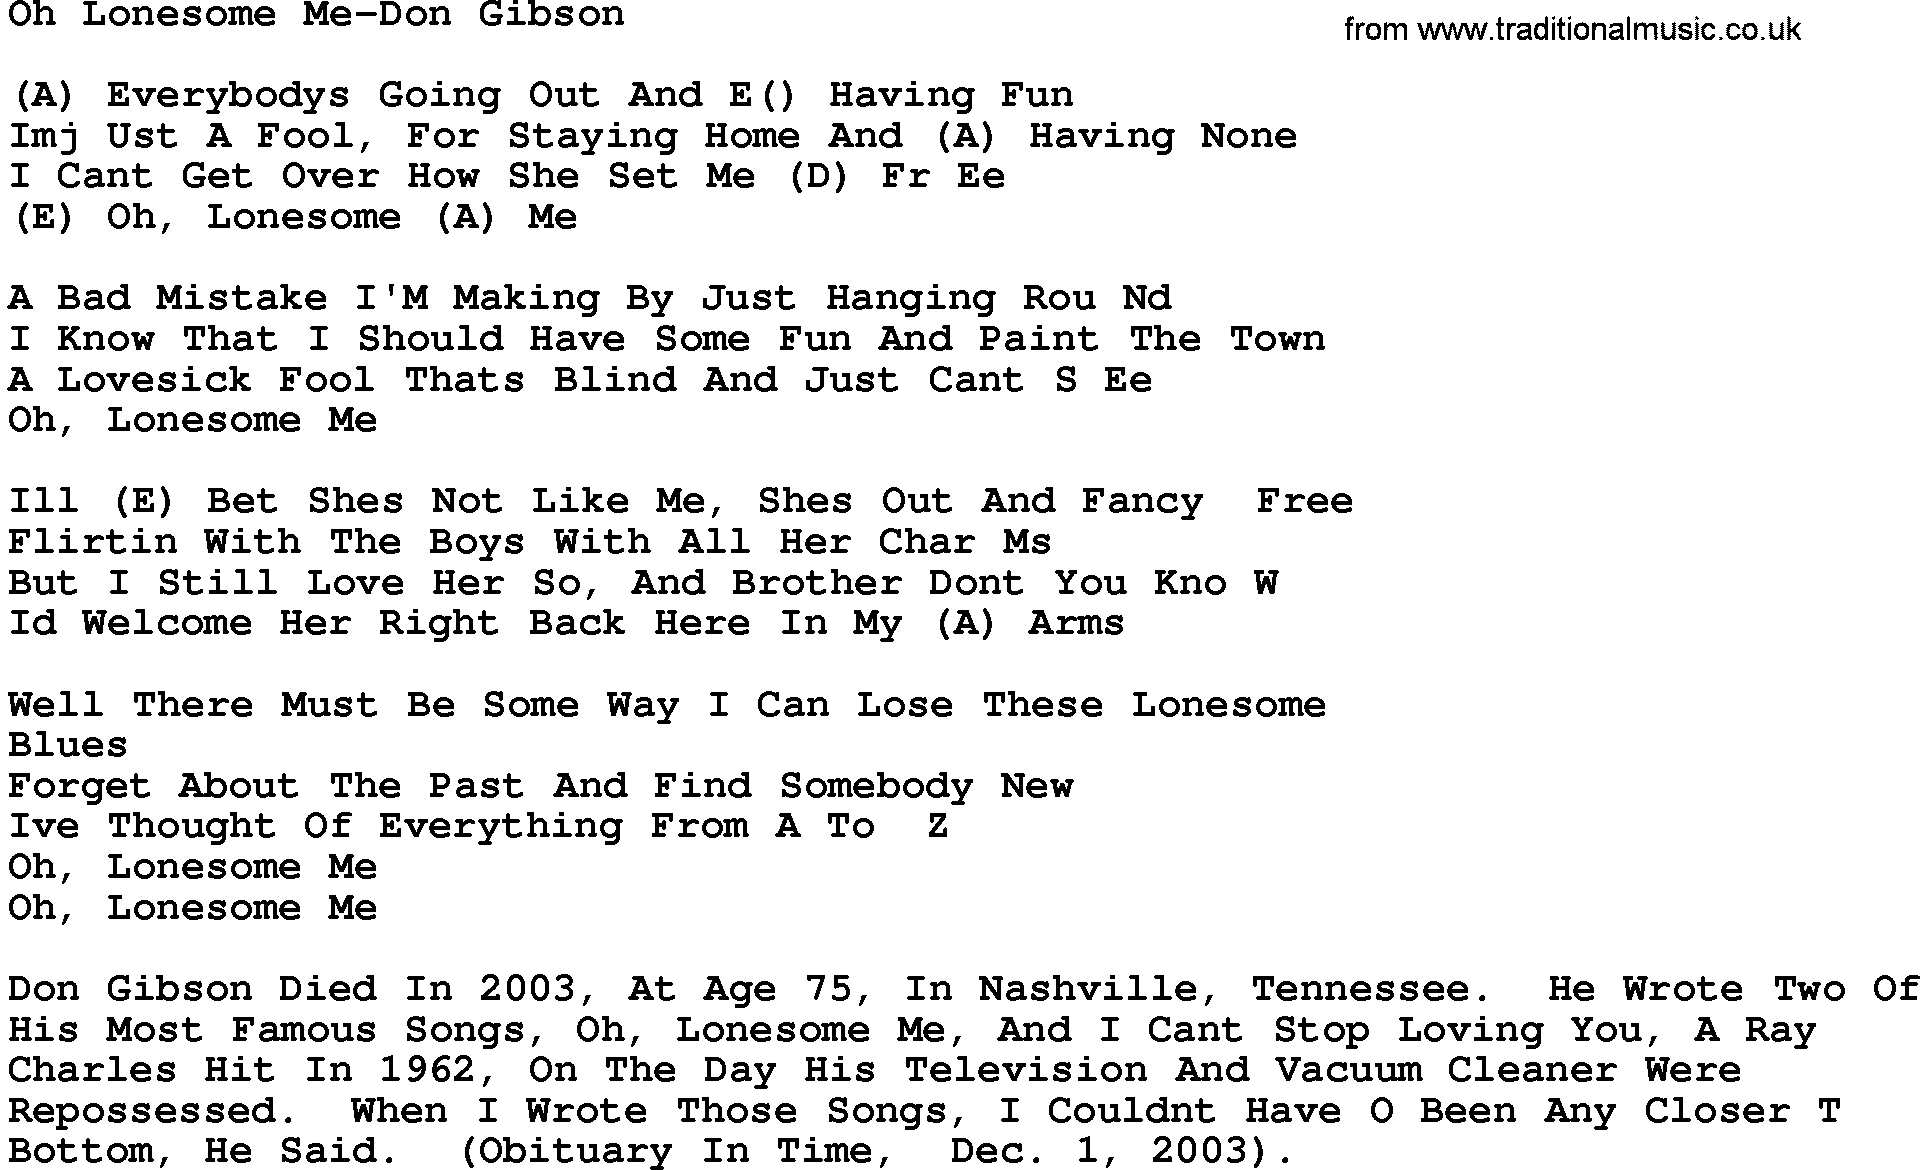 Country music song: Oh Lonesome Me-Don Gibson lyrics and chords